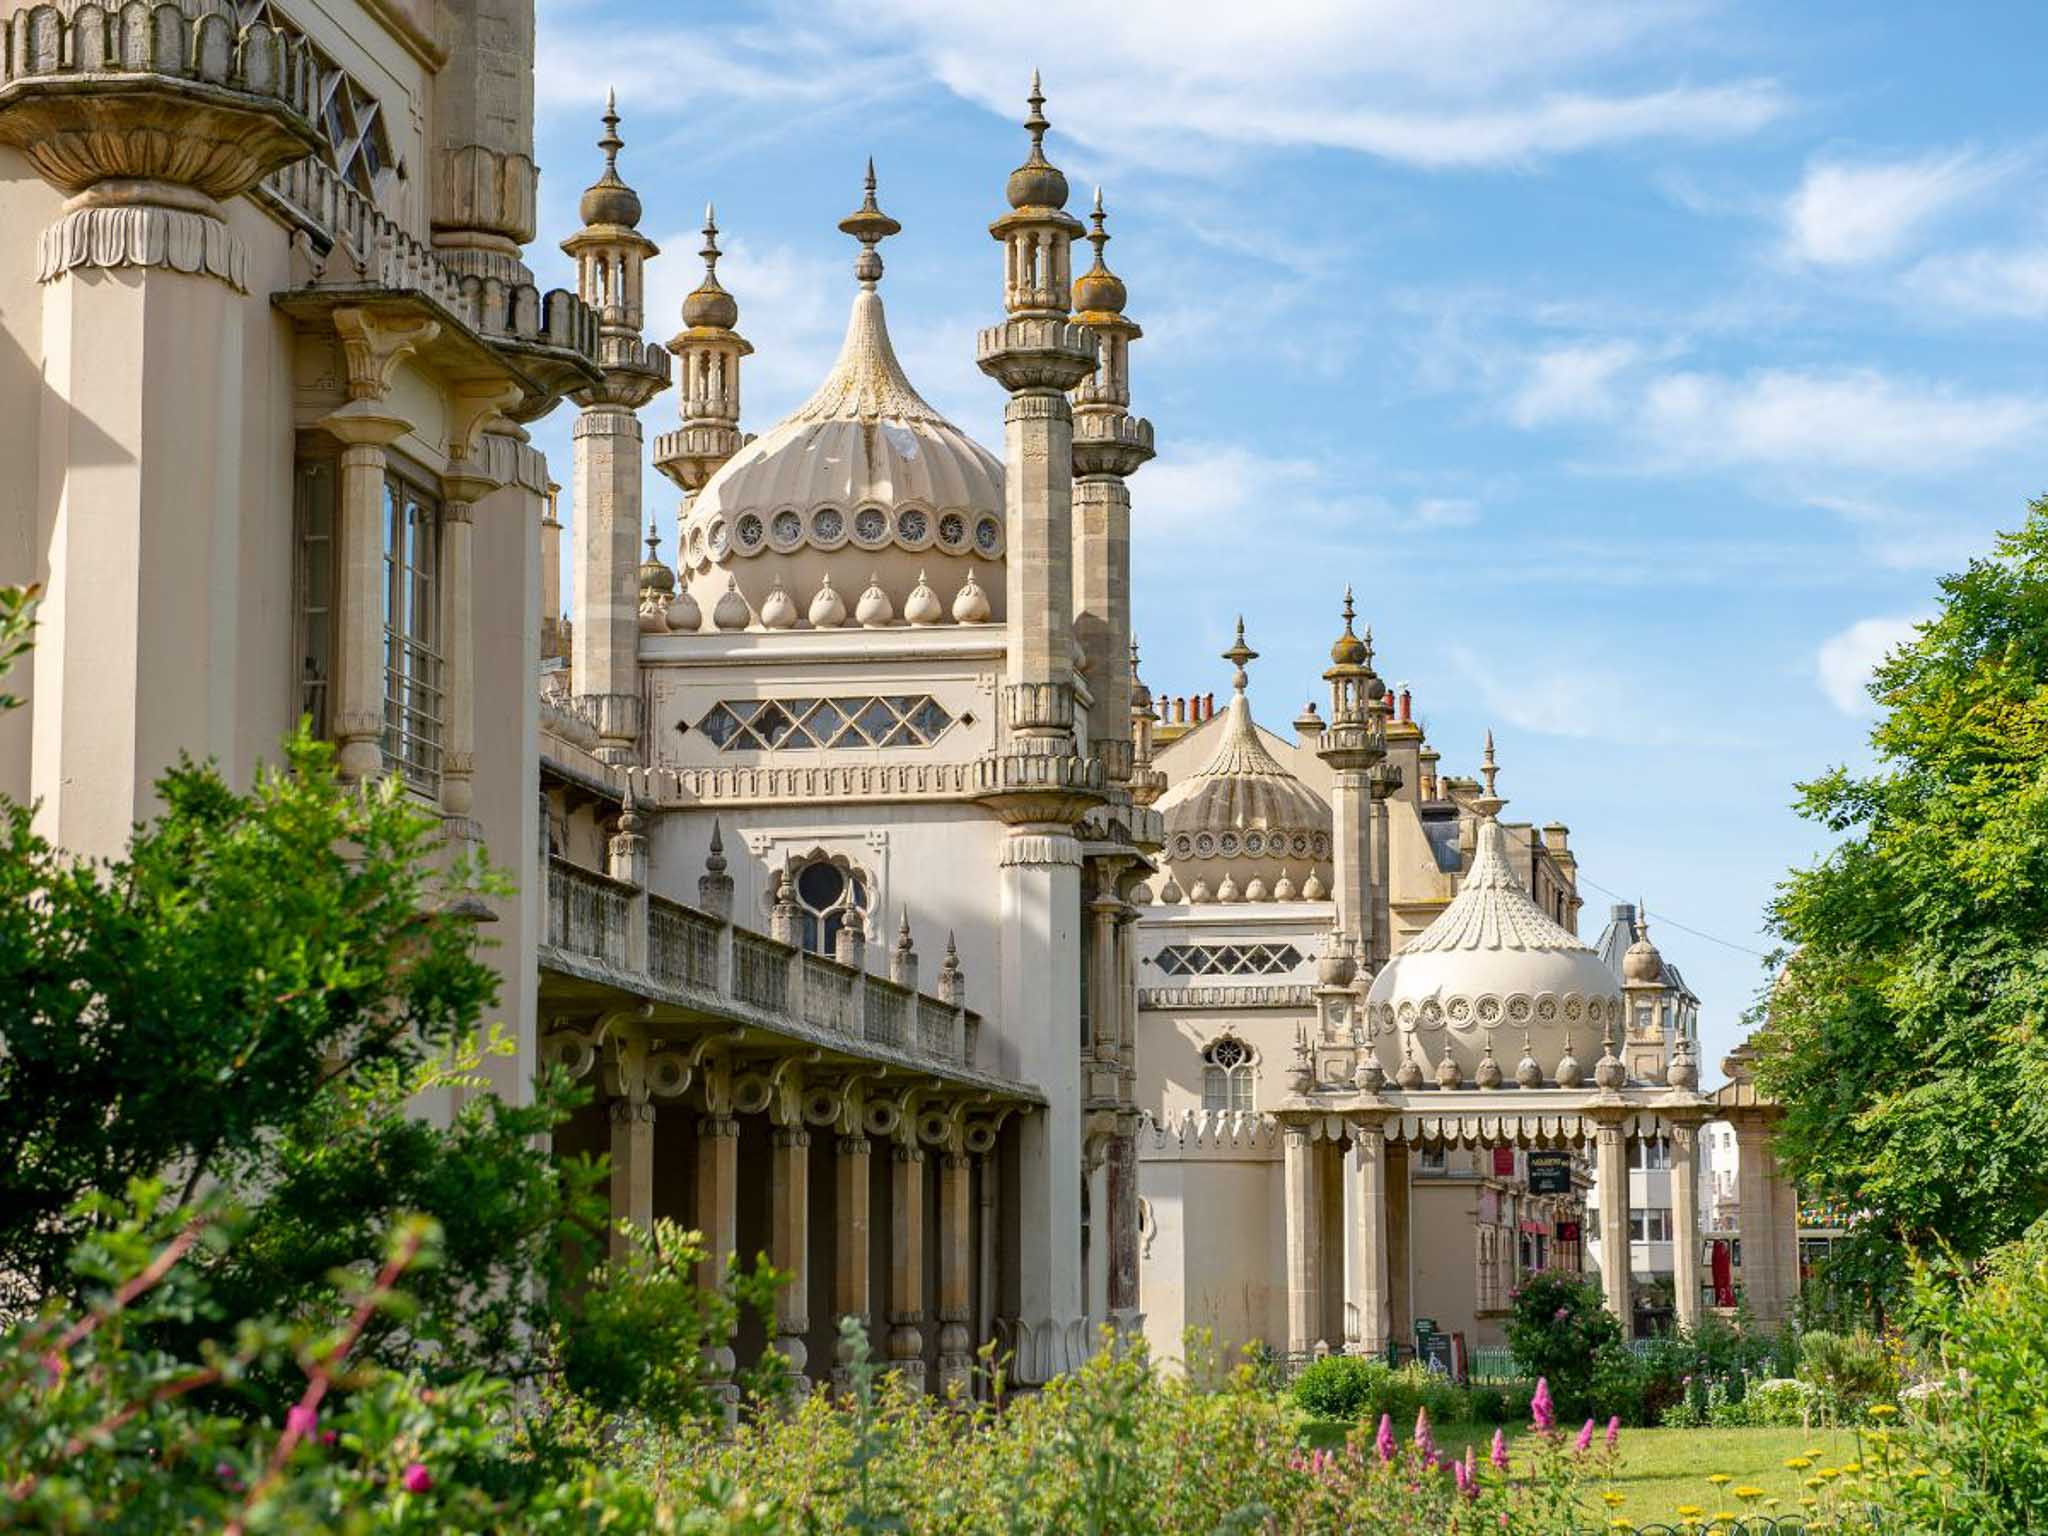 Brighton Pavilion and Gardens, blue sky in the background